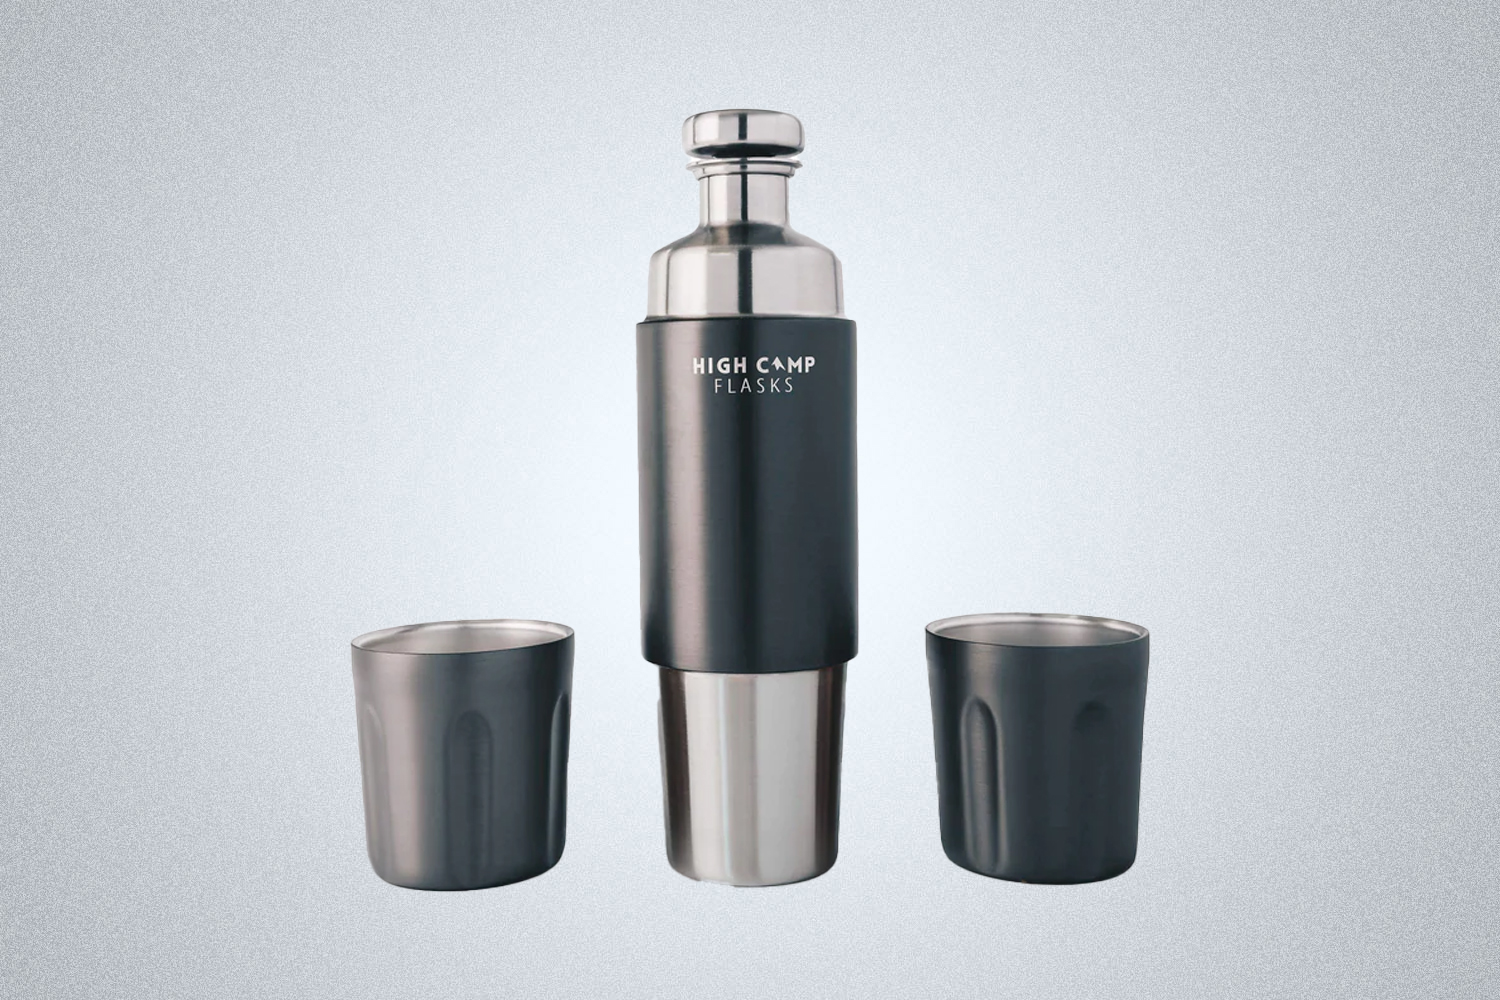 High Camp Firelight 750 Flask is the best flask for camping and taking shots in 2022